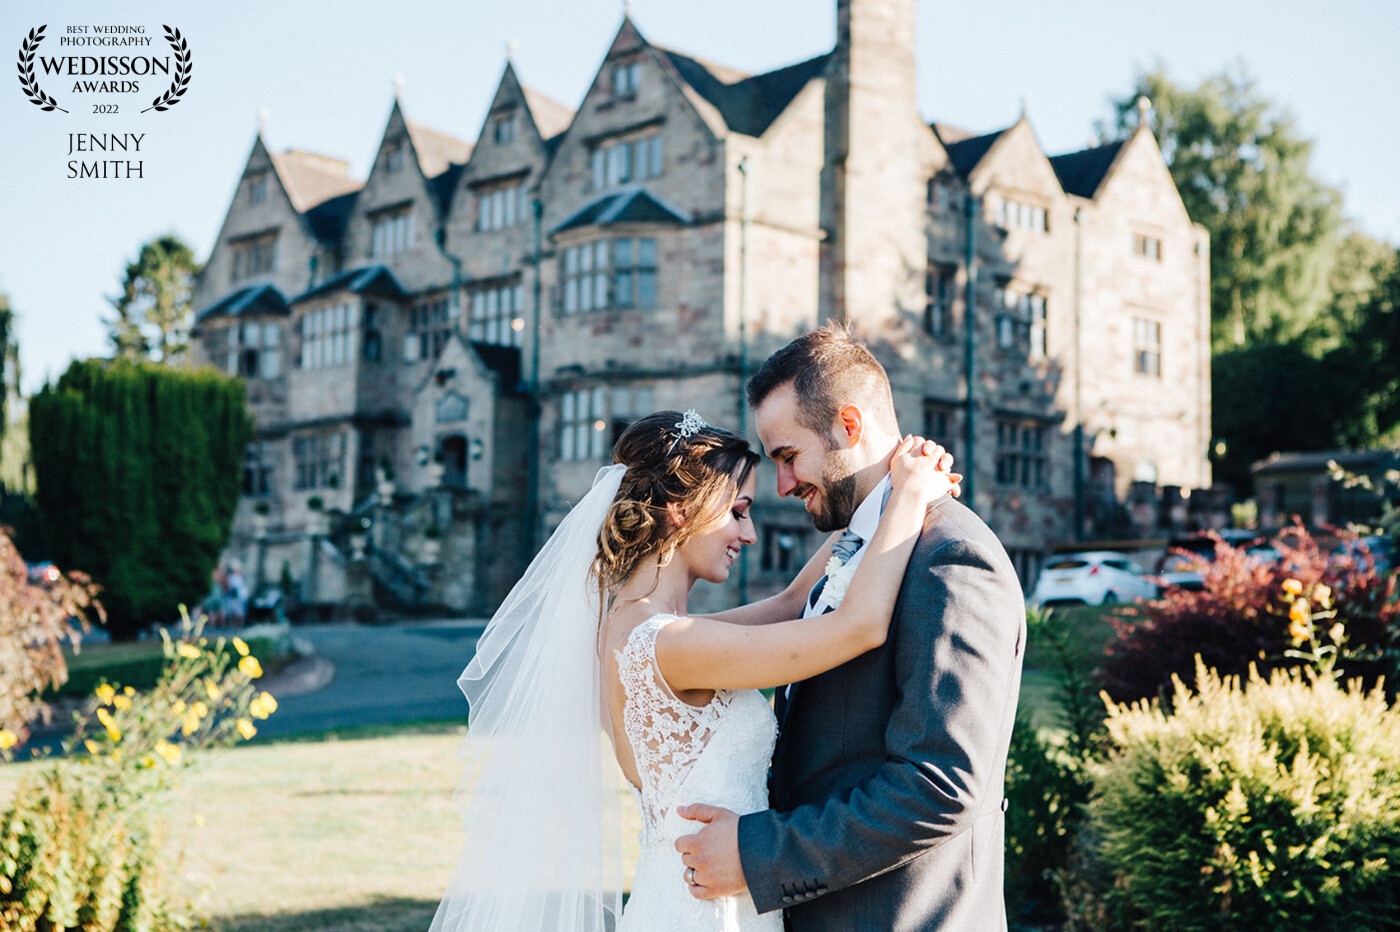 This lovely portrait of the couple was taken during golden hour at Weston Hall in Staffordshire. We took a walk around the grounds to catch the light and get the stunning venue in the background.